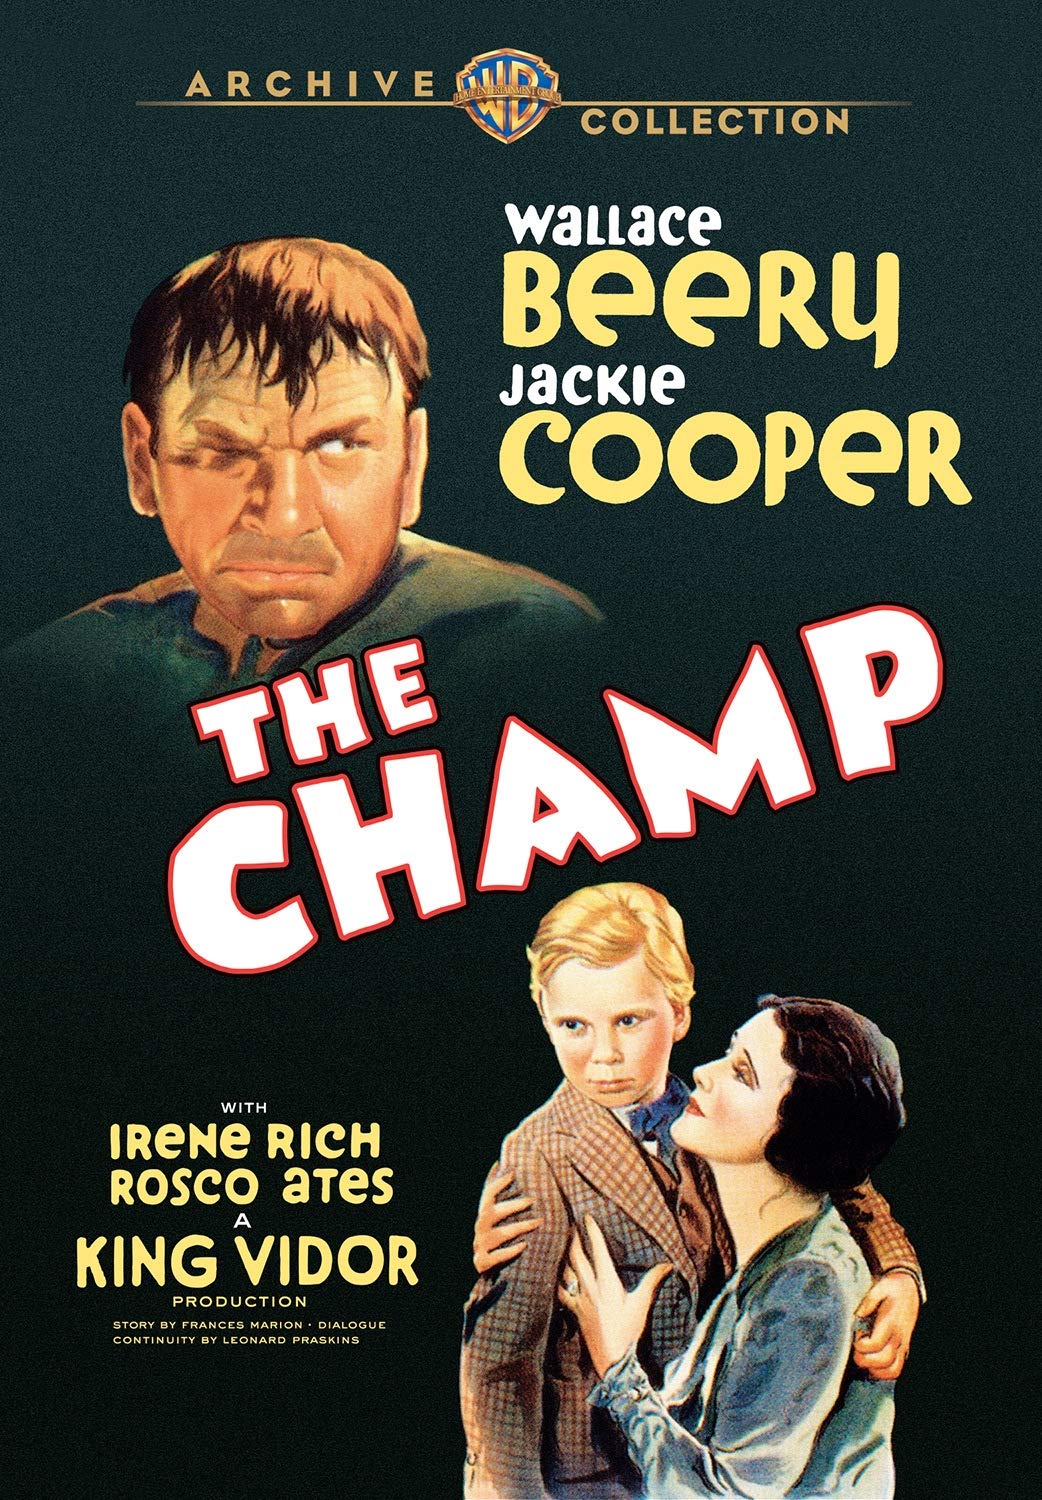 The Champ (1931) starring Wallace Beery, Jackie Cooper